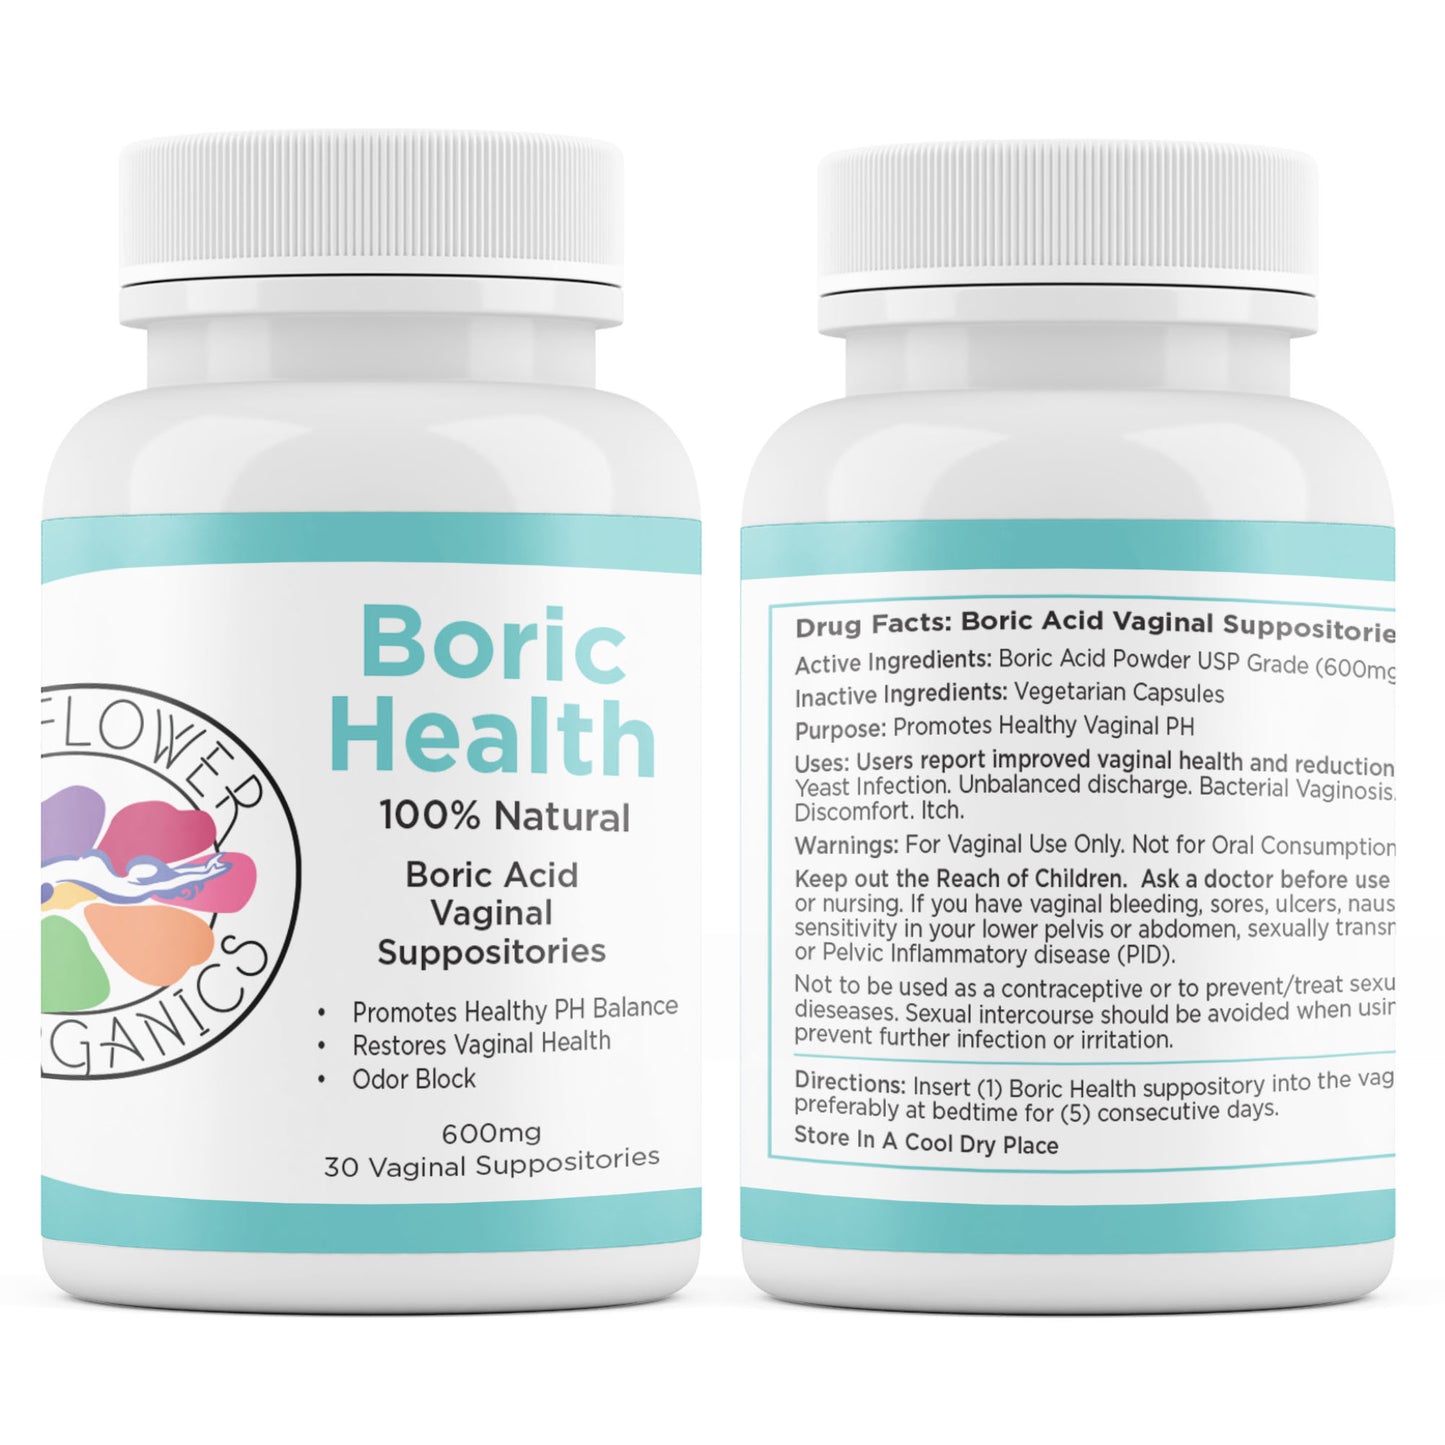 Boric Health Suppositories 30 Count, (600mg)